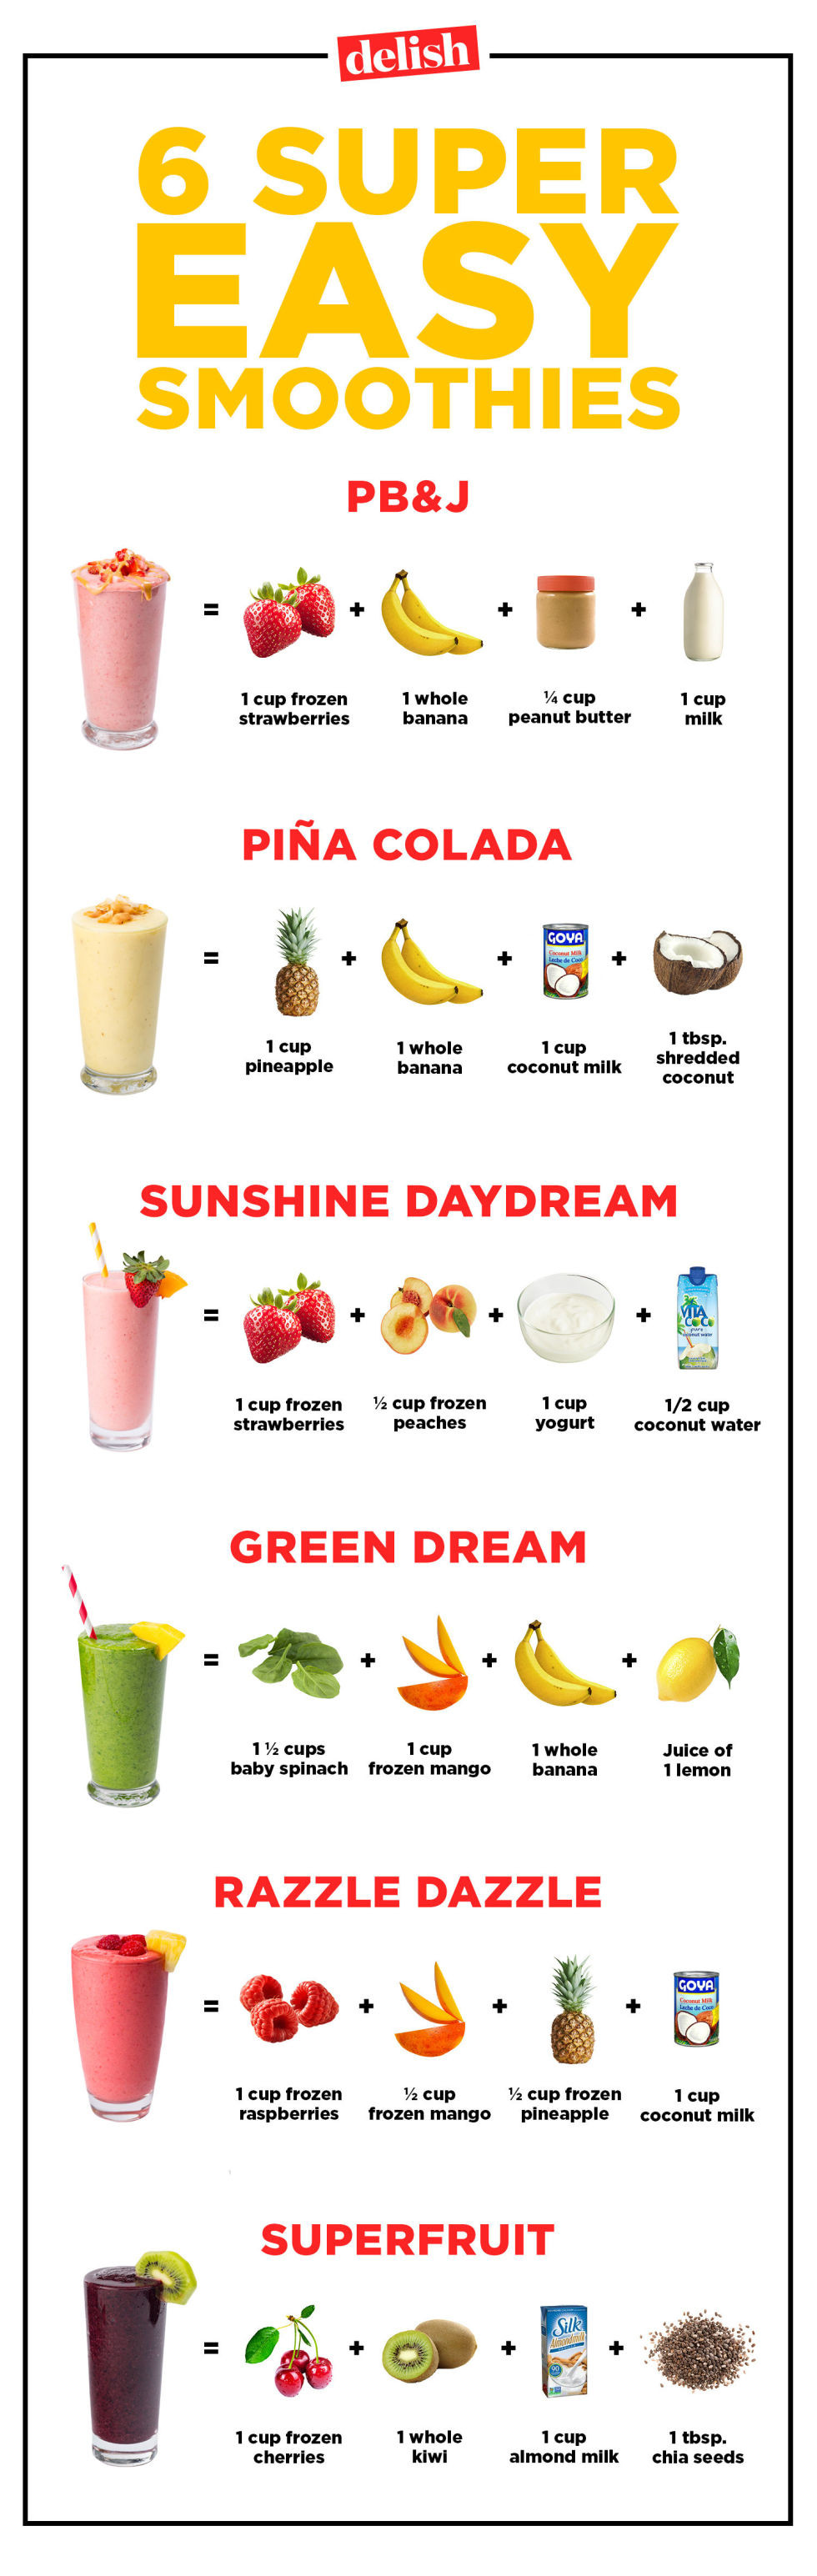 Smoothie Recipes Healthy
 healthy fruit smoothie recipes